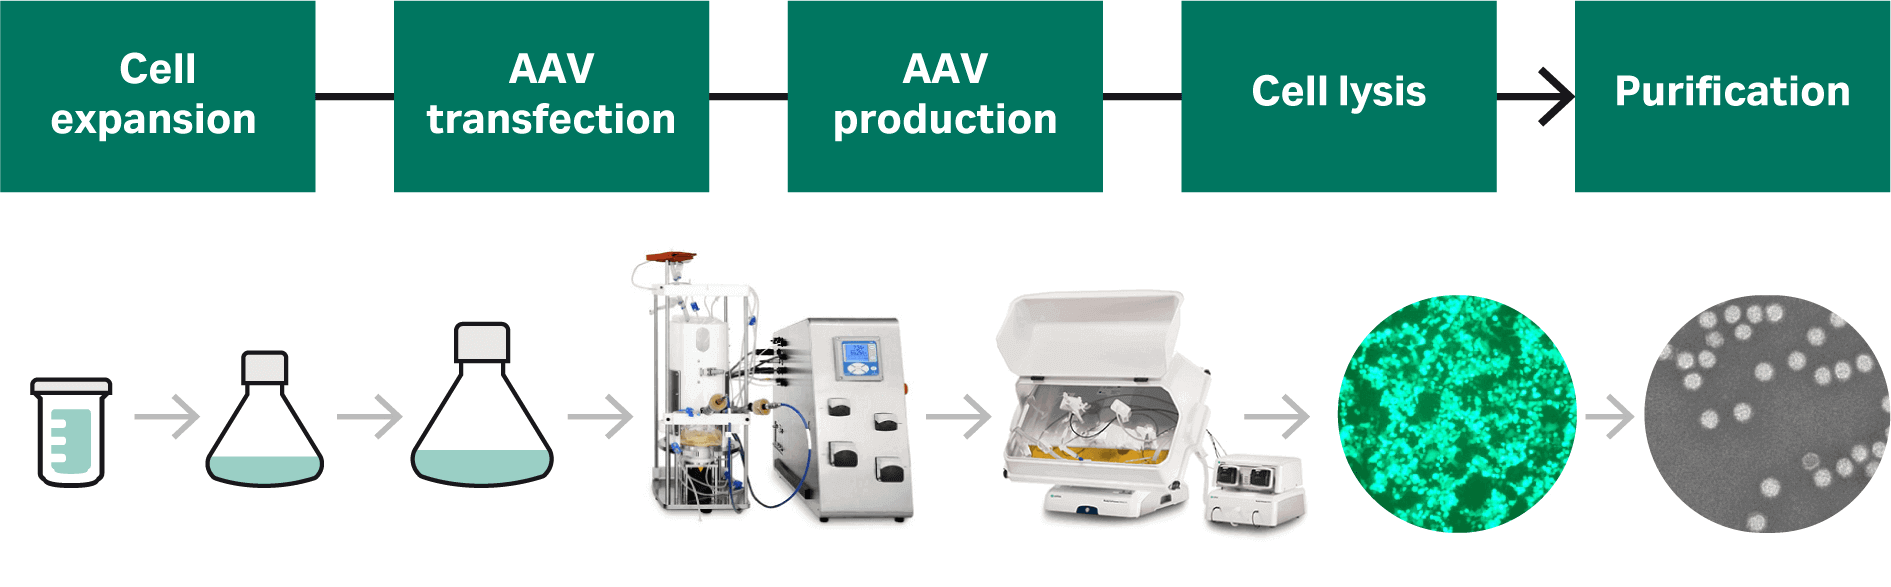 A start-to-finish process for AAV production includes cell culture, AAV transfection, AAV production, cell lysis and purification; we present a detailed account of the cell culture and transfection process development.